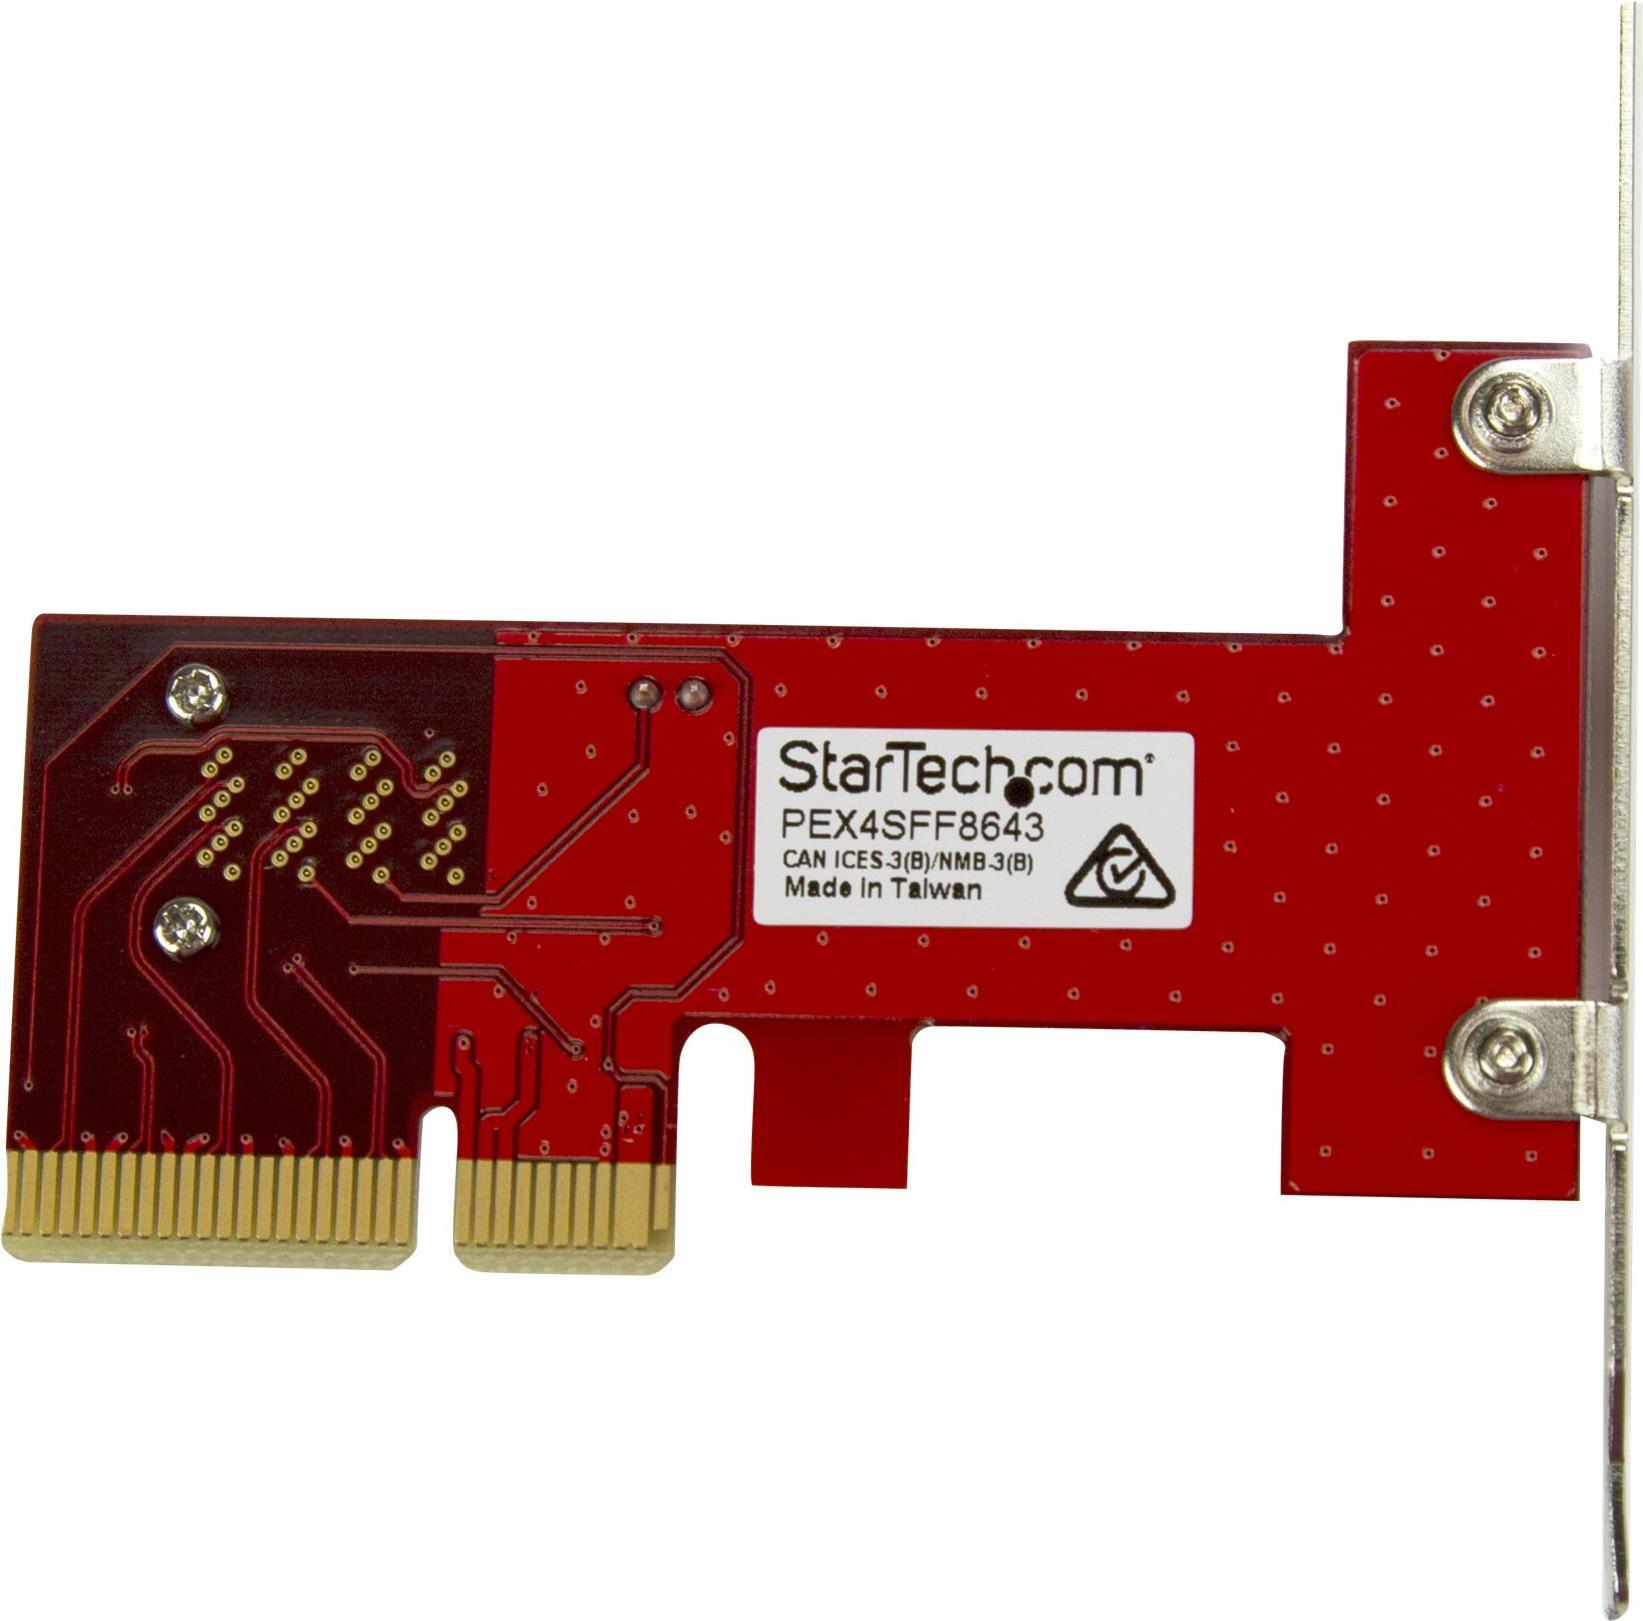 StarTech.com x4 PCI Express to SFF-8643 Adapter for PCIe NVMe U.2 SSD (PEX4SFF8643)